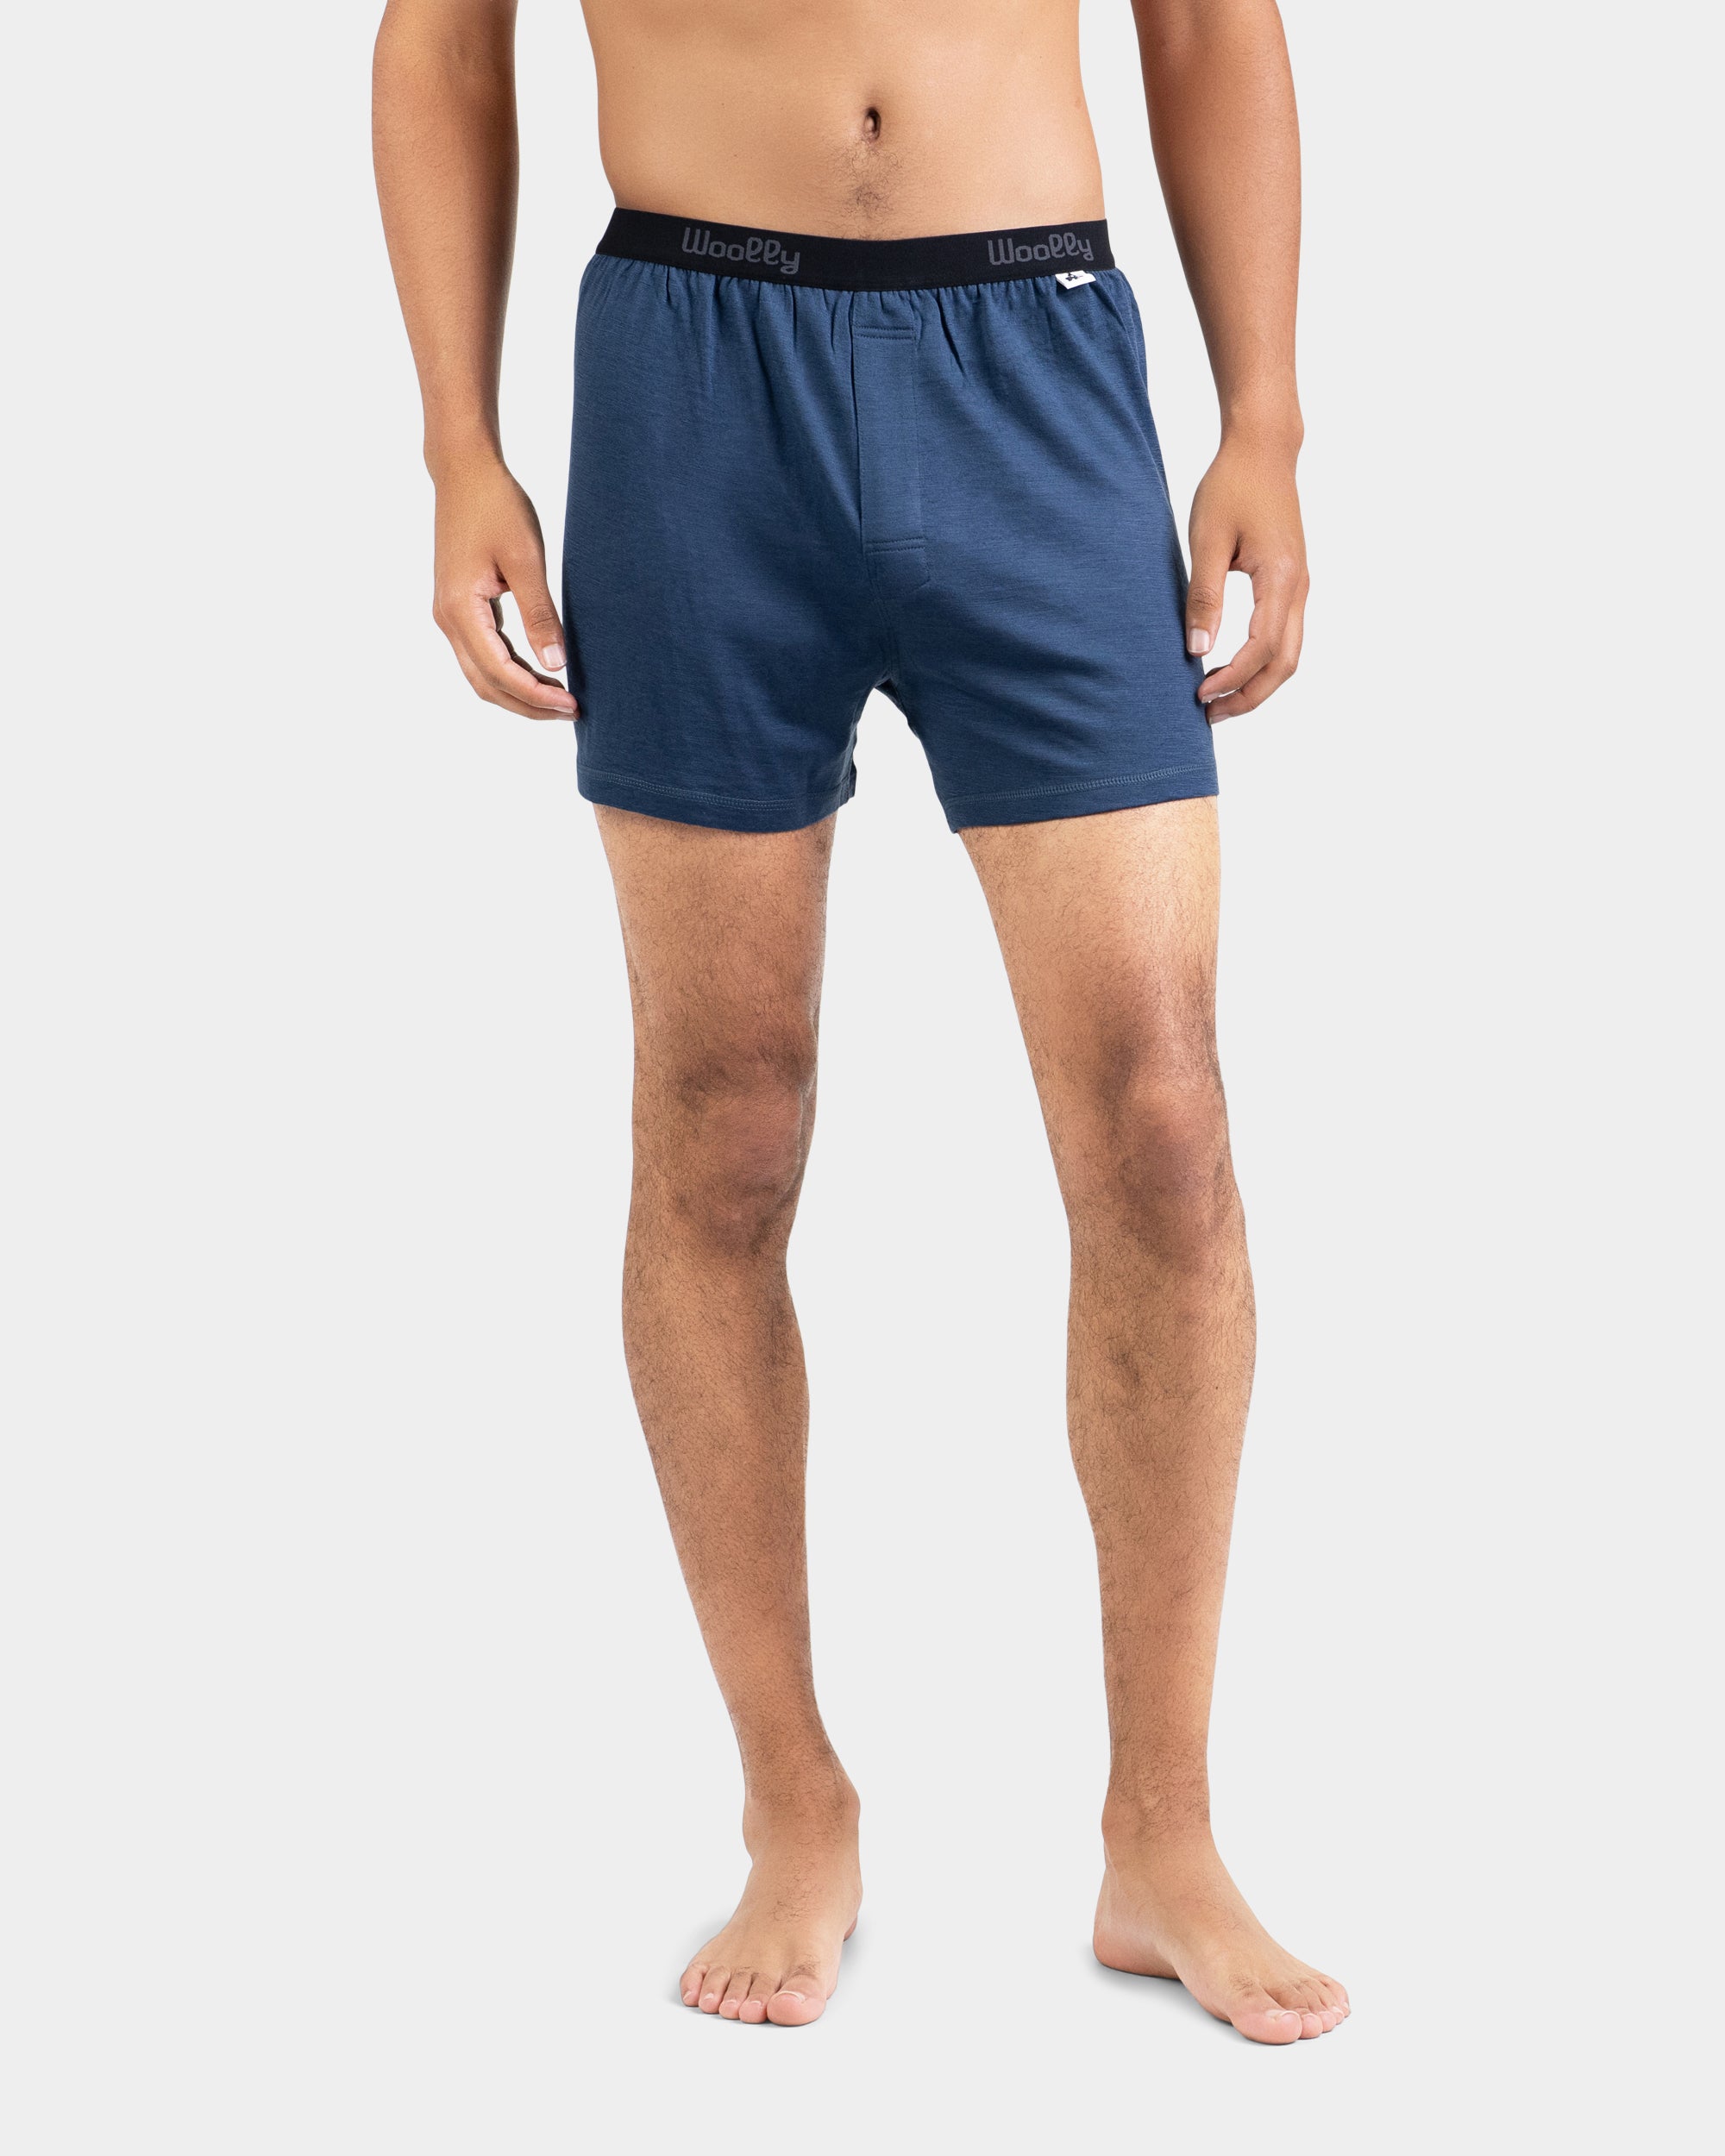 Woolly Clothing Co. Men's Boxer